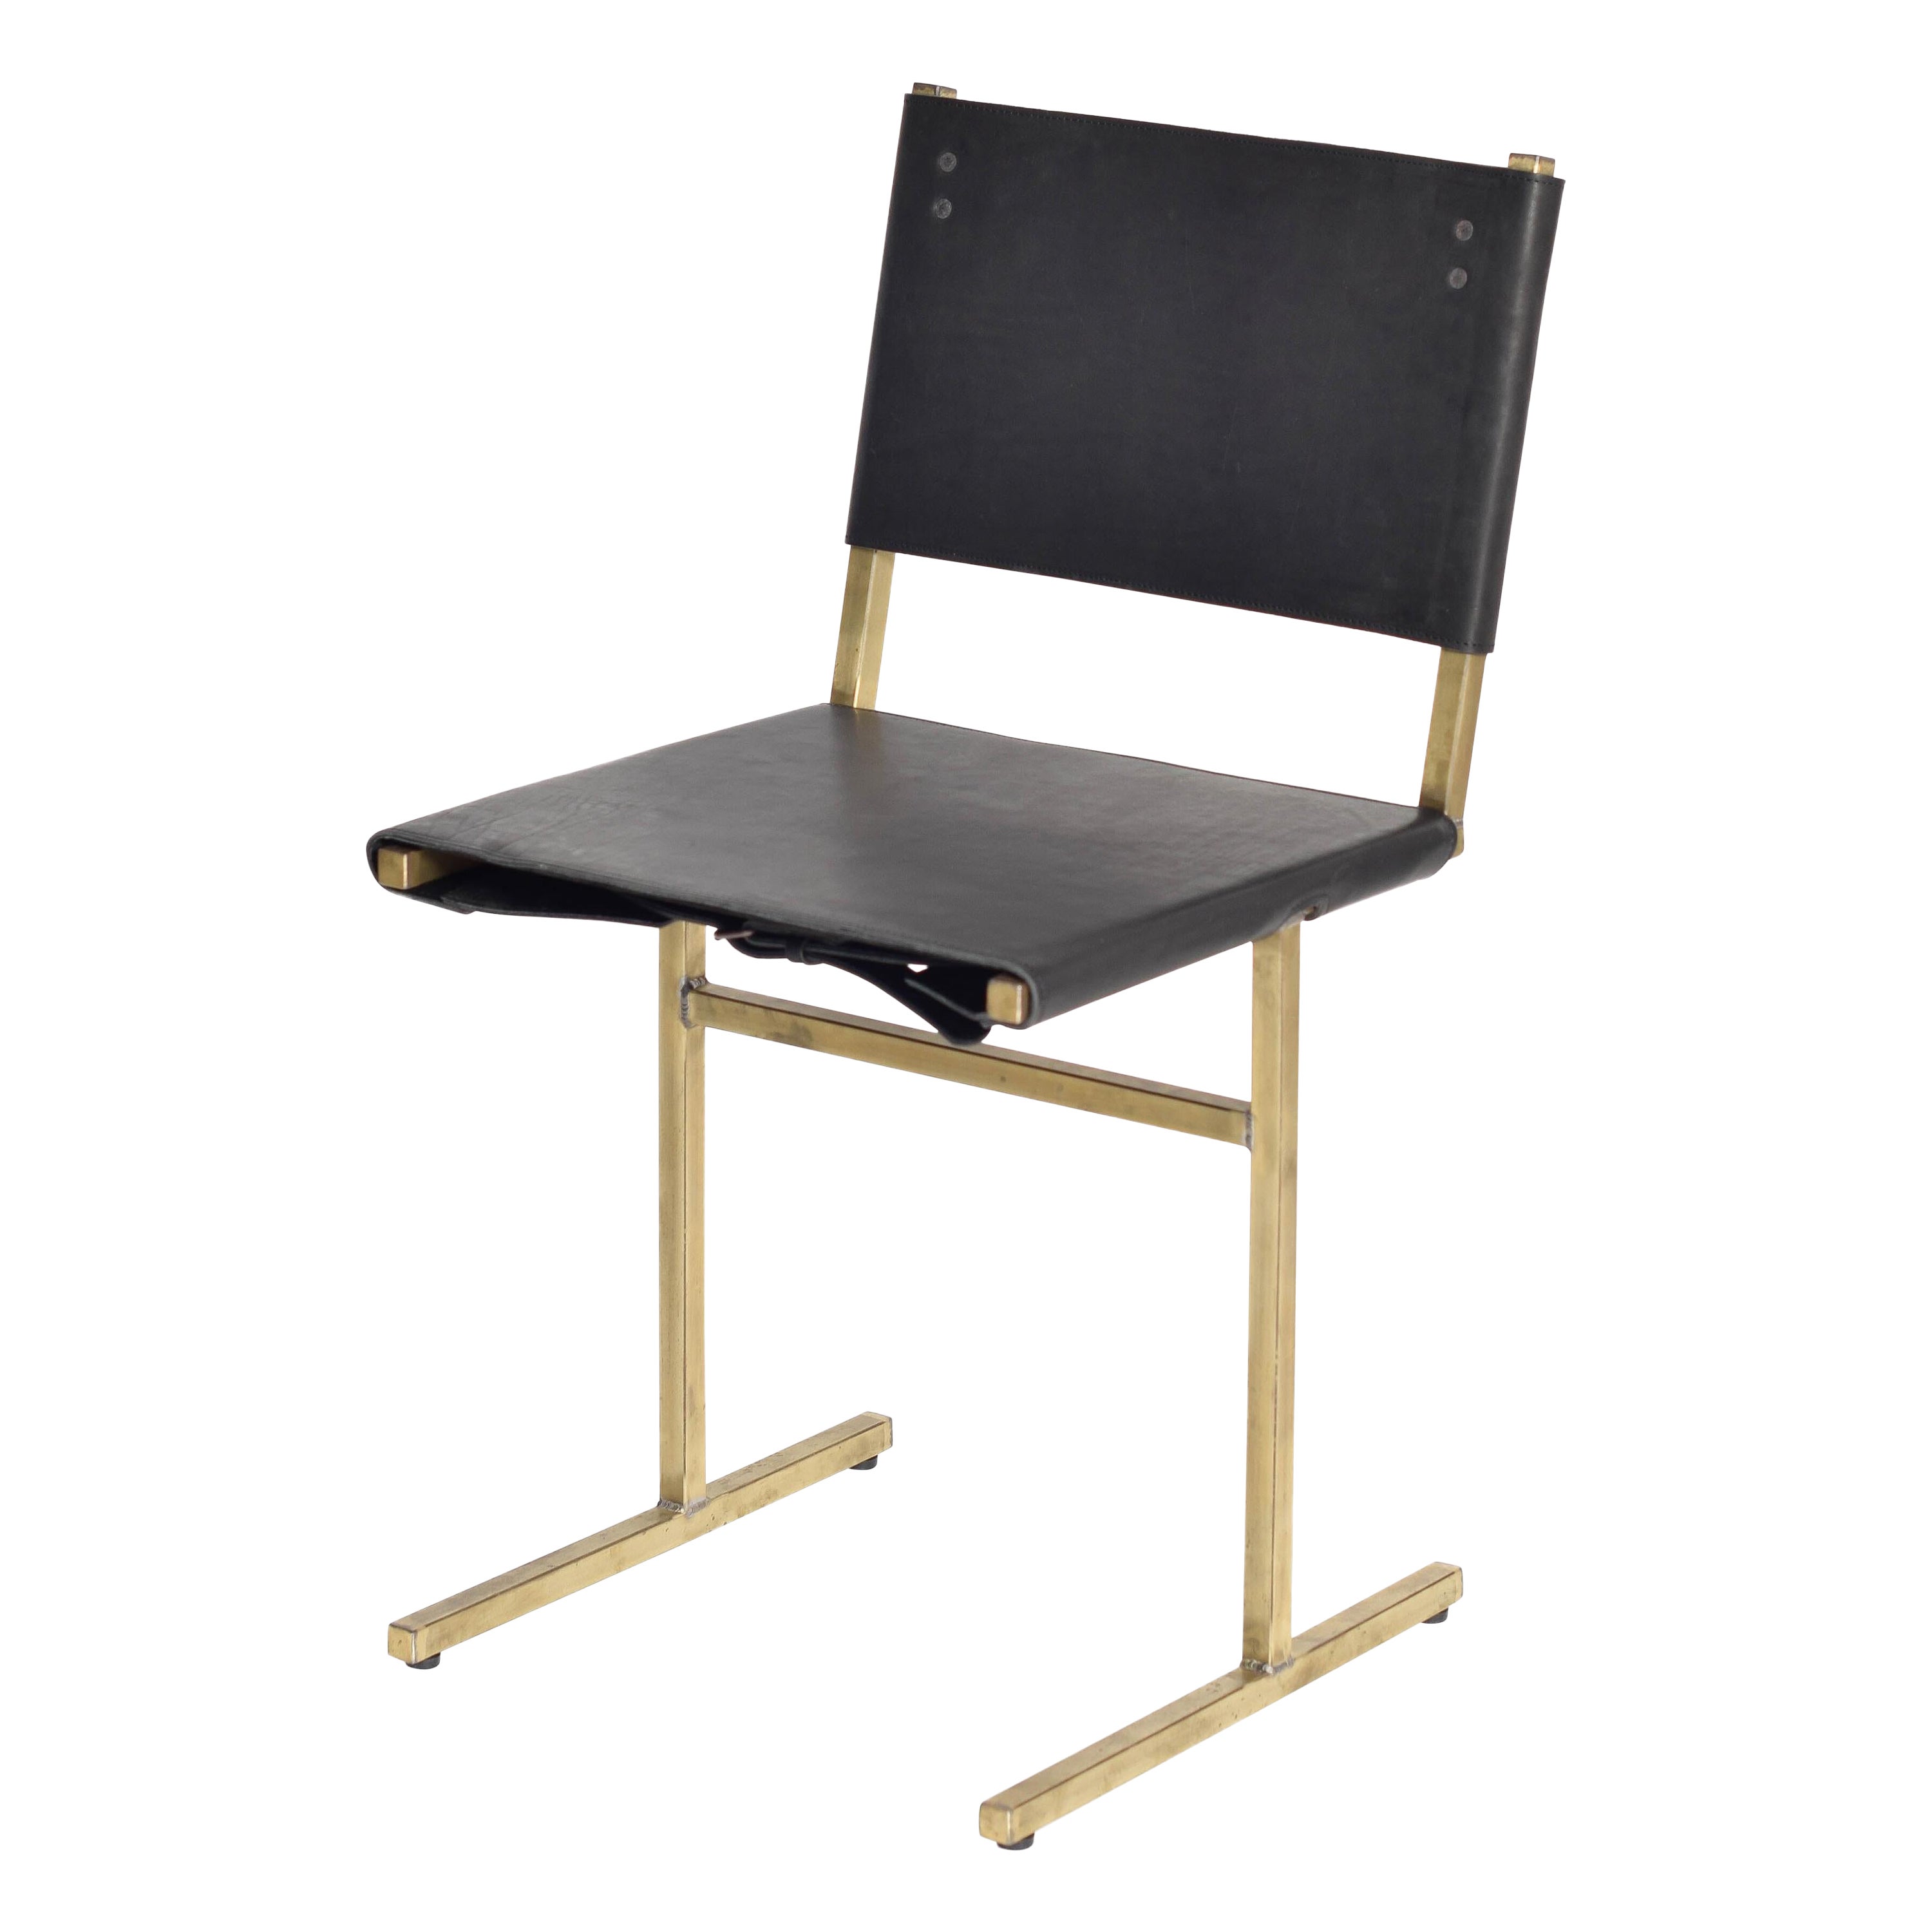 Black and Brass Memento Chair, Jesse Sanderson For Sale